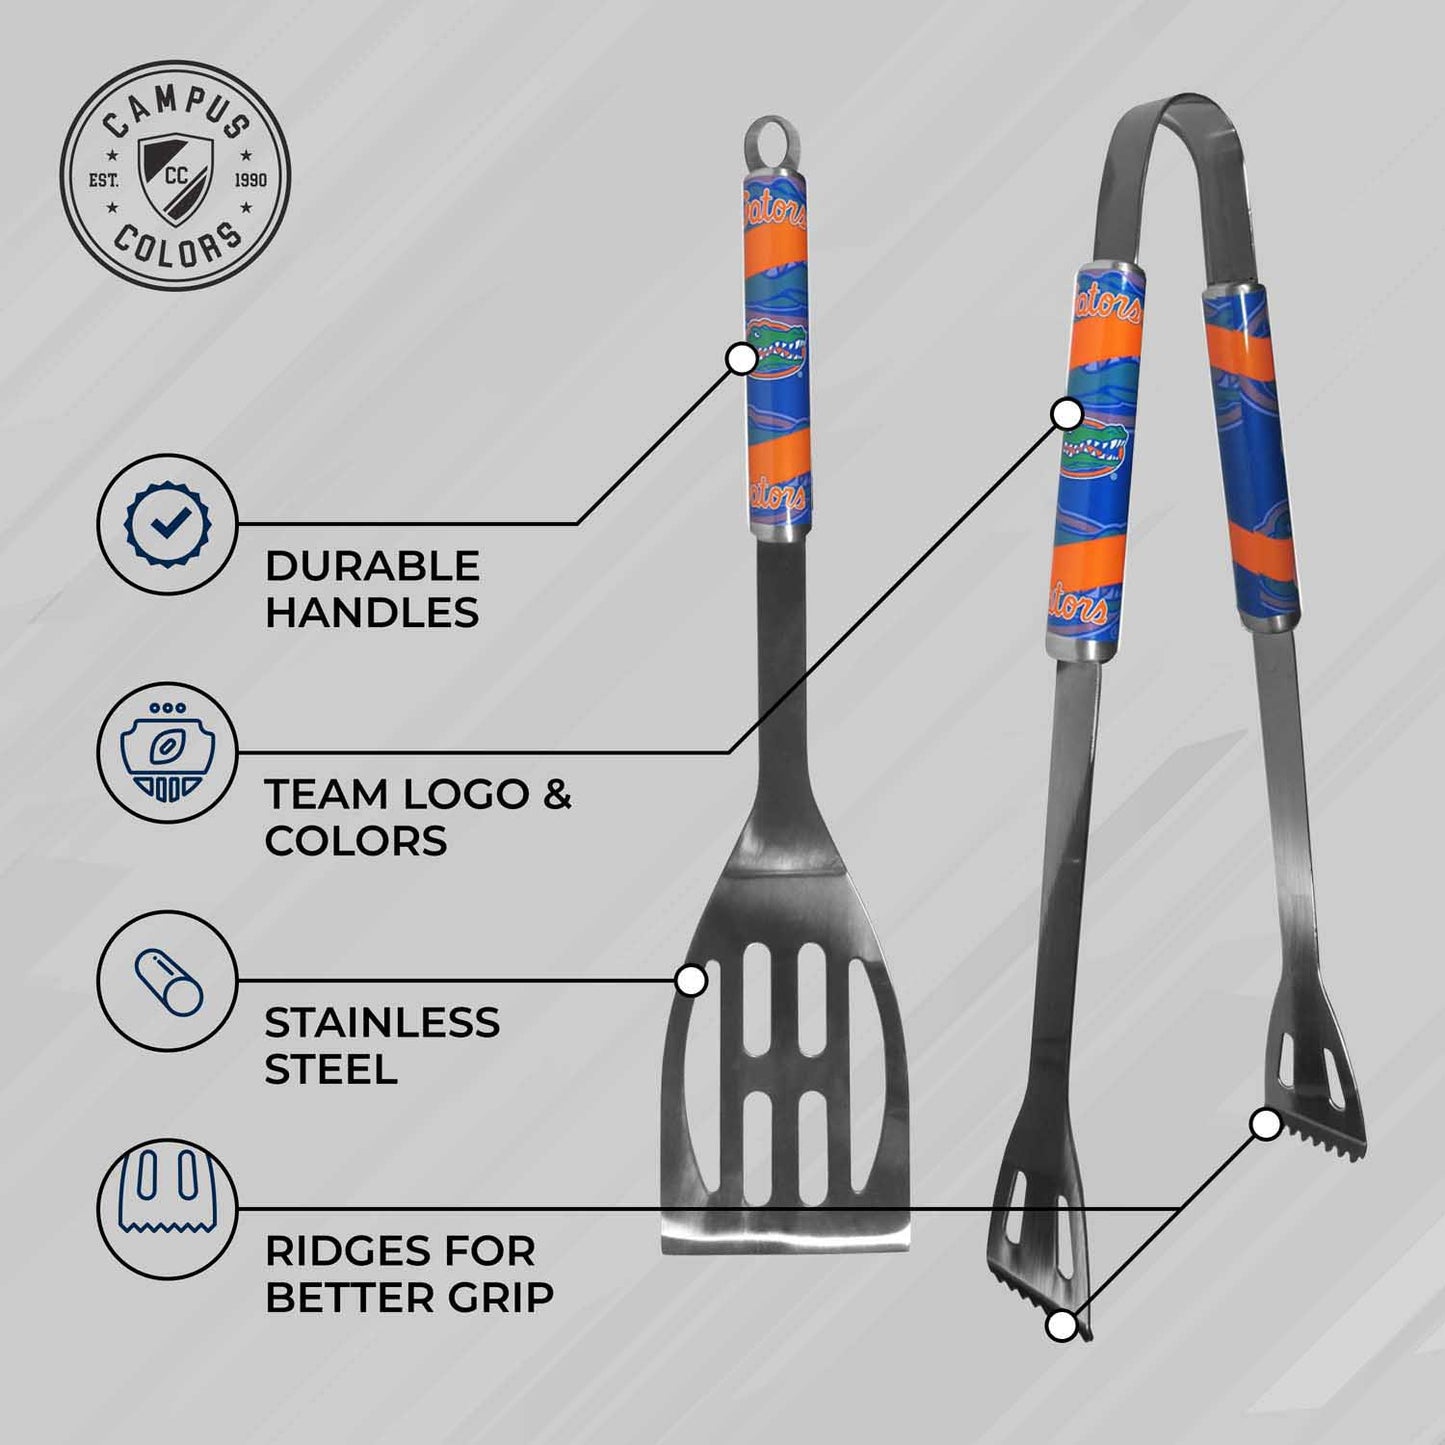 Florida Gators Collegiate University Two Piece Grilling Tools Set with 2 Magnet Chip Clips - Chrome